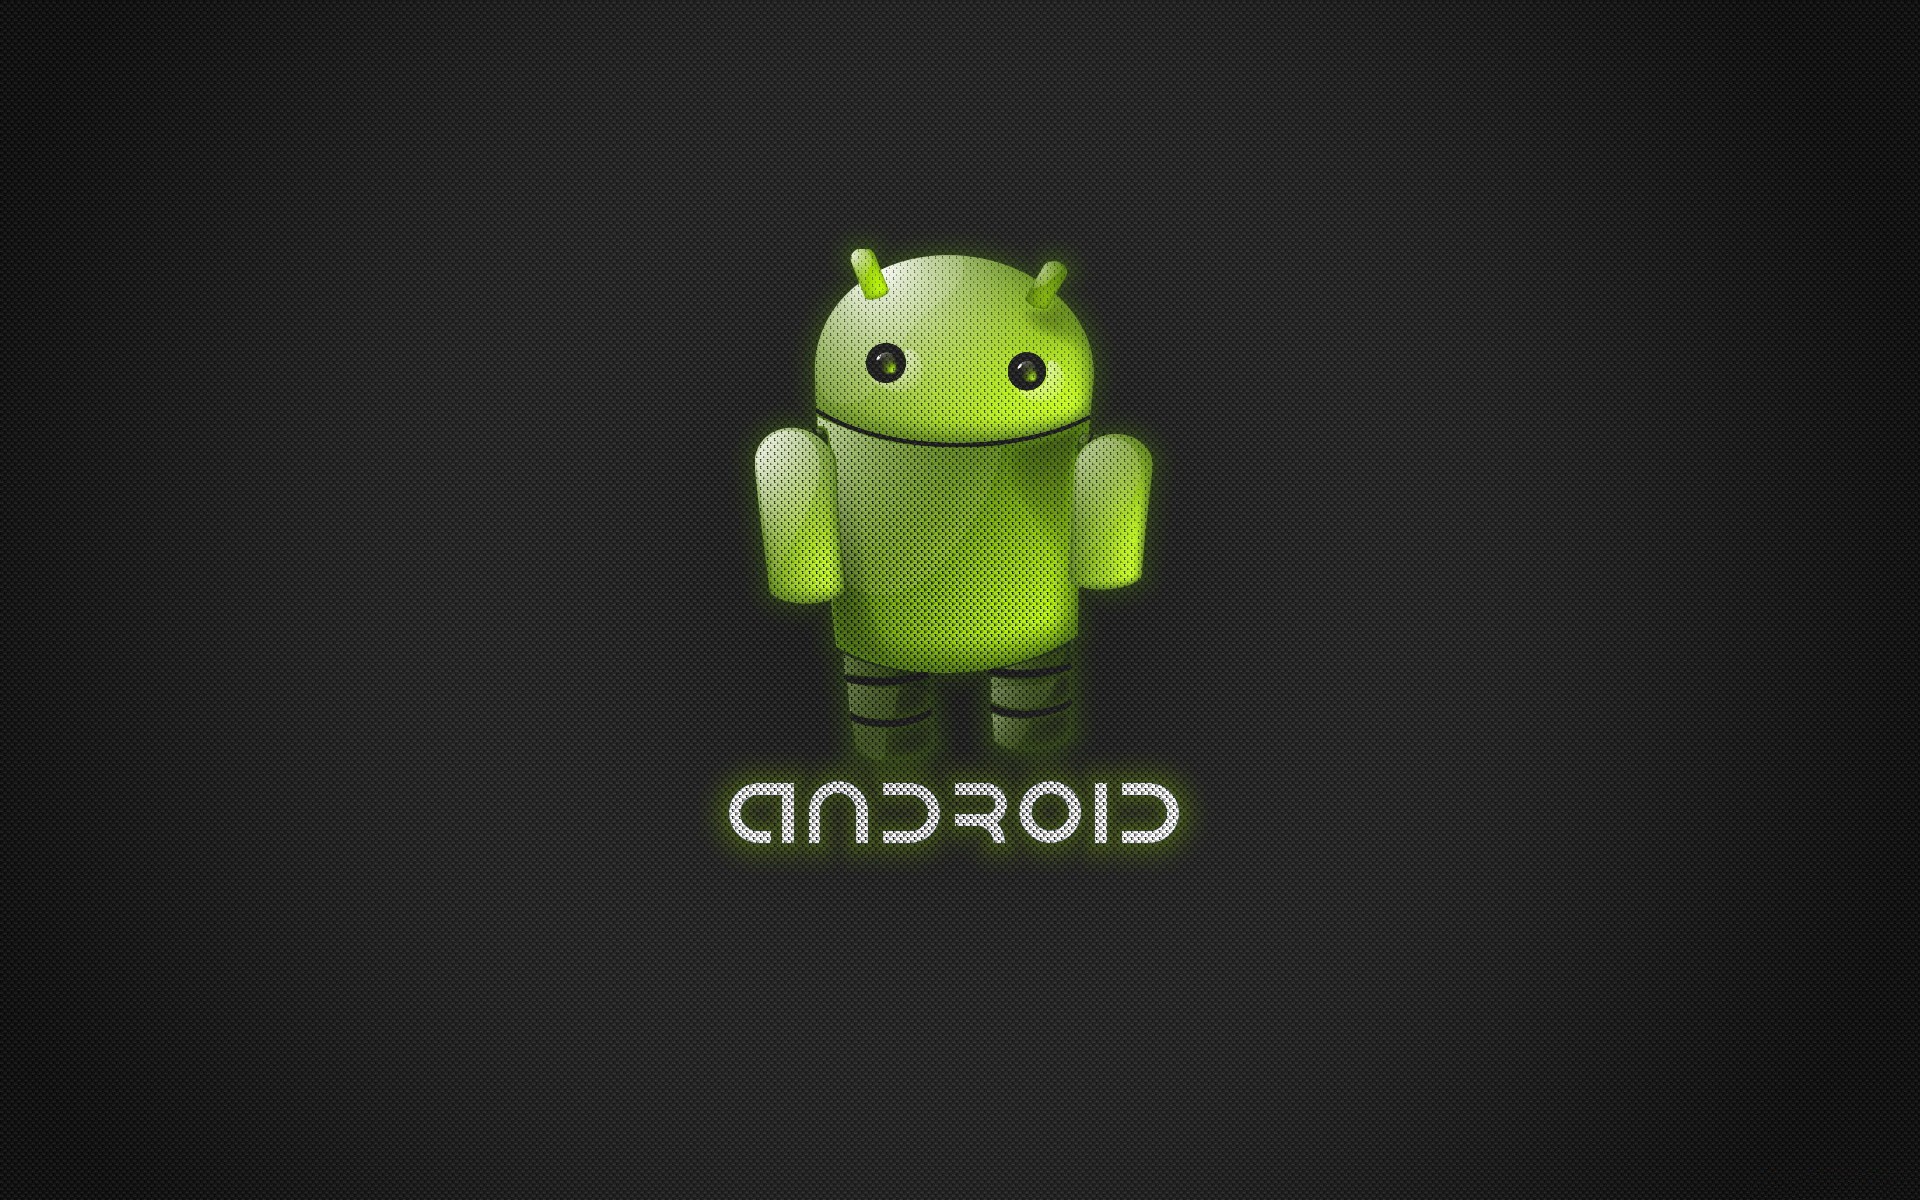 General 1920x1200 Android (operating system) Android Marshmallow simple background logo black background